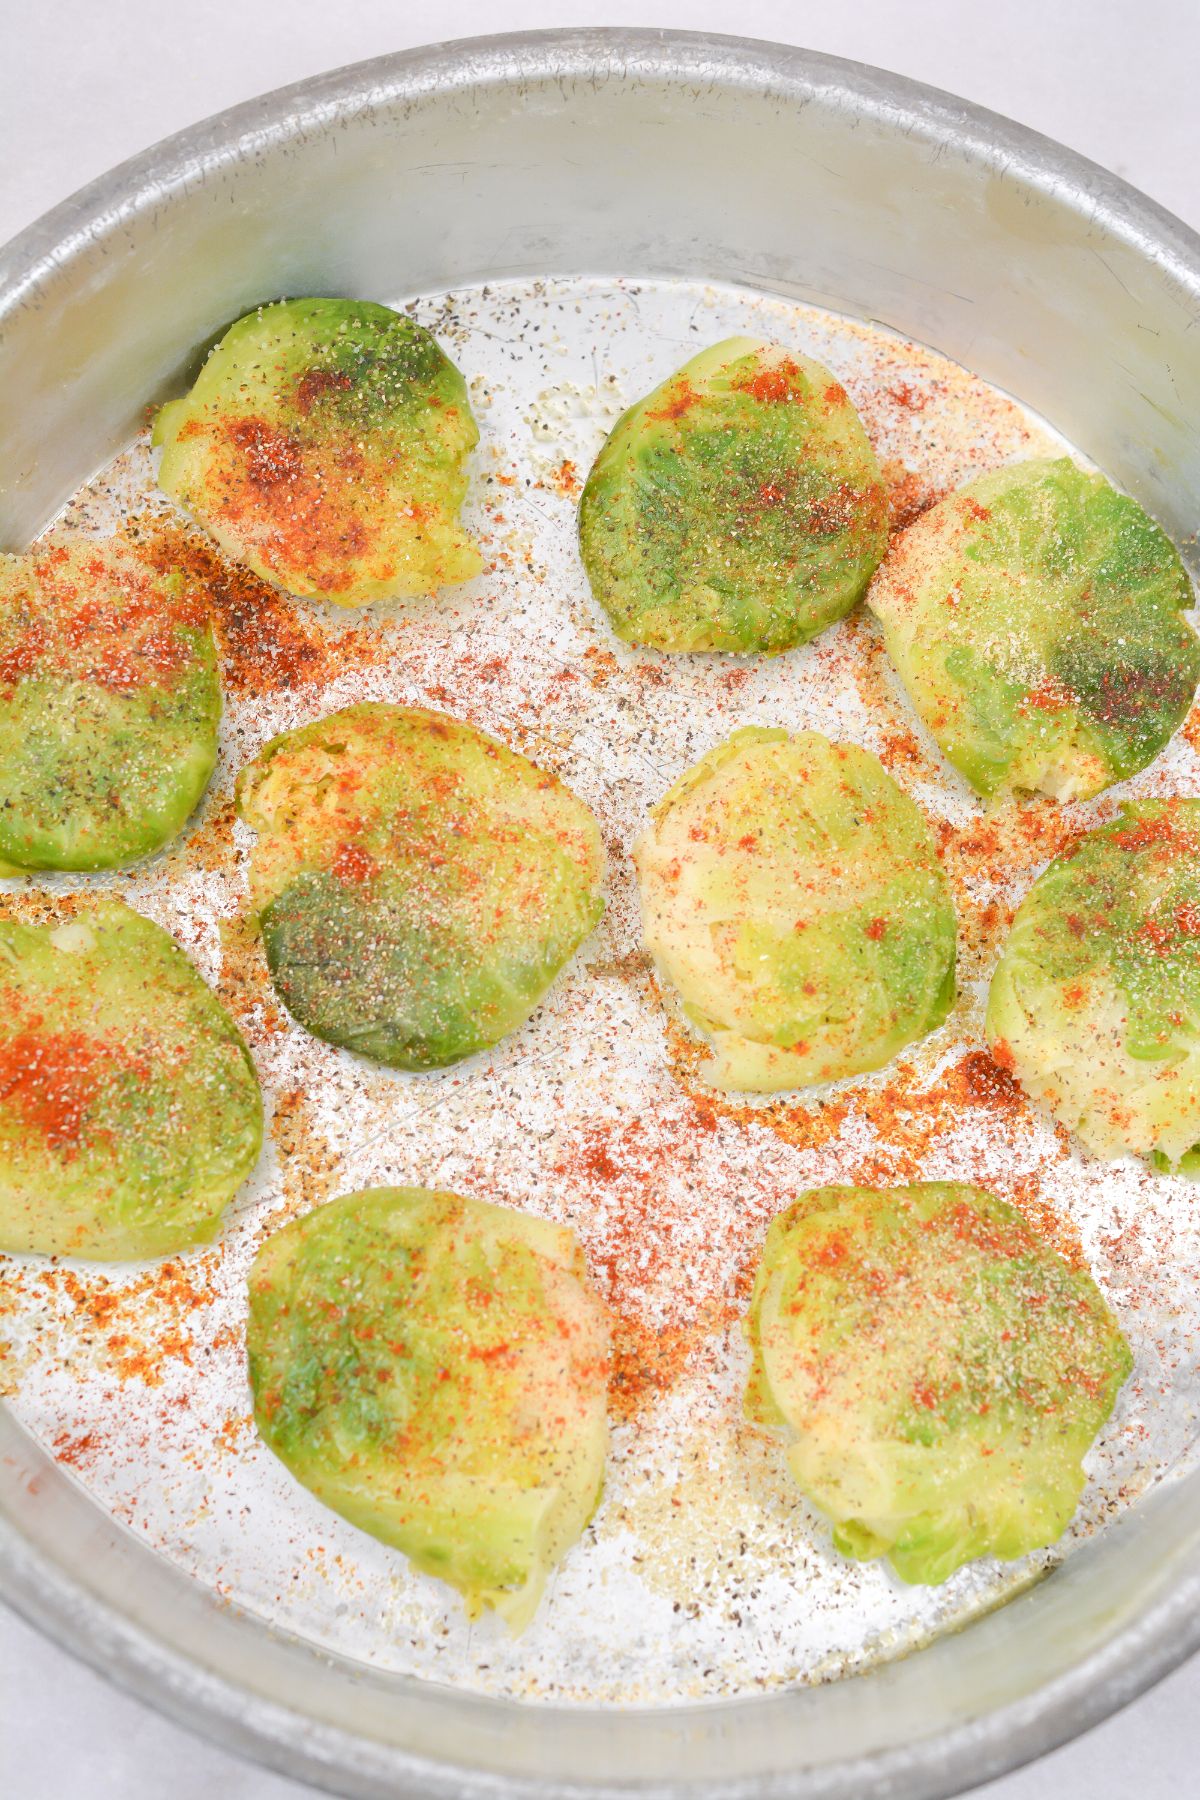 Brussels sprouts in a pan seasoned with garlic powder, onion powder, paprika, salt and pepper